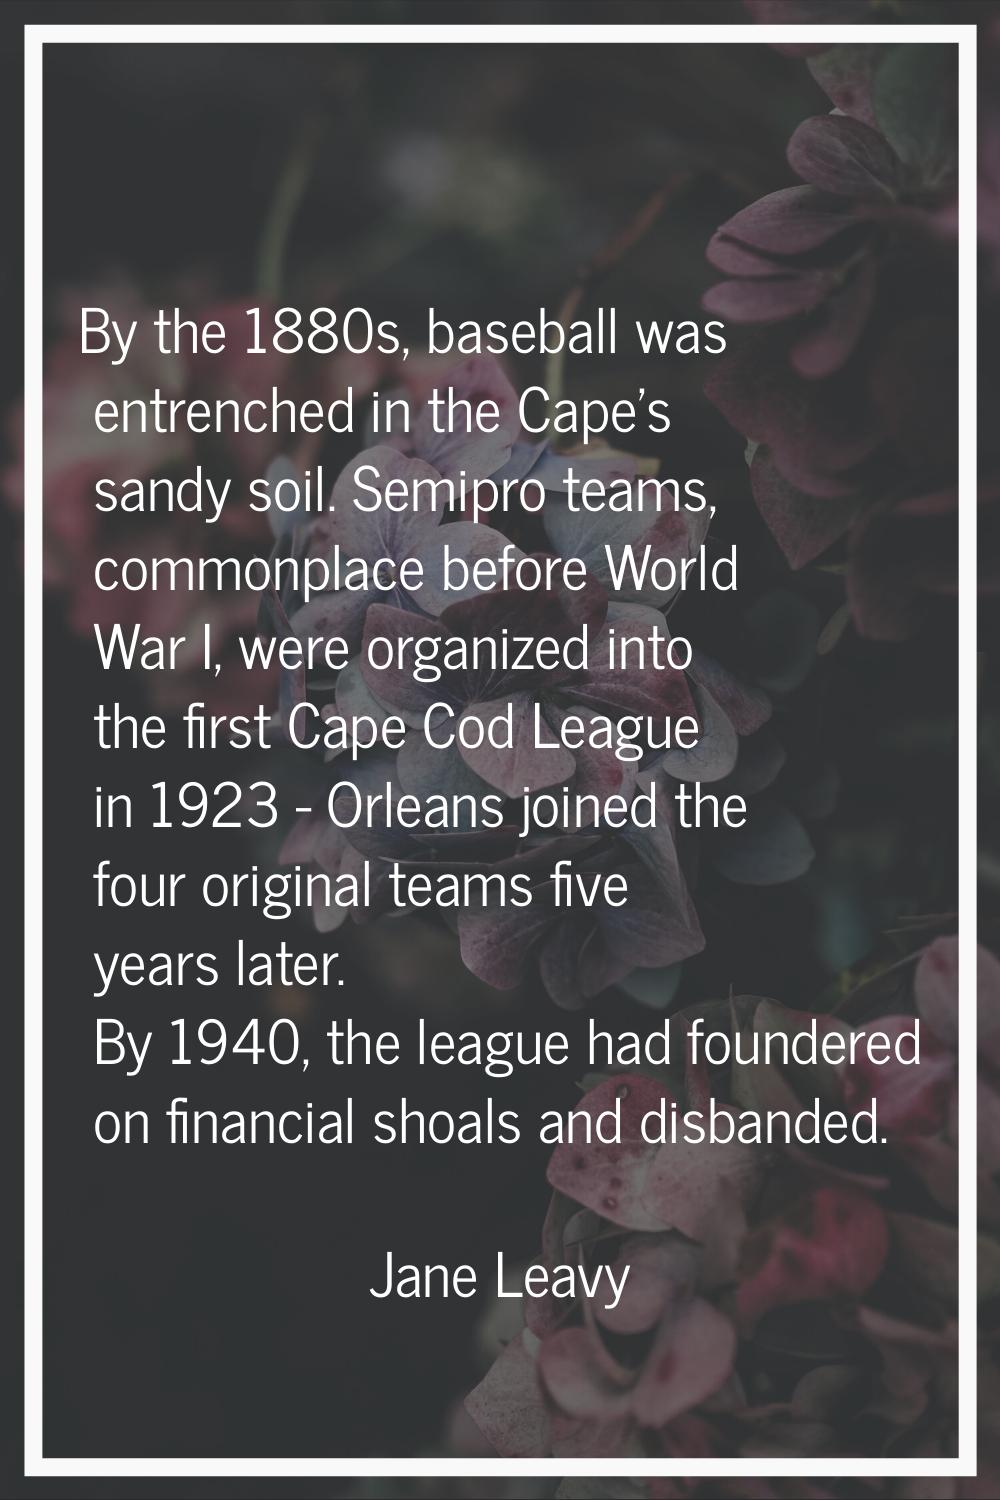 By the 1880s, baseball was entrenched in the Cape's sandy soil. Semipro teams, commonplace before W